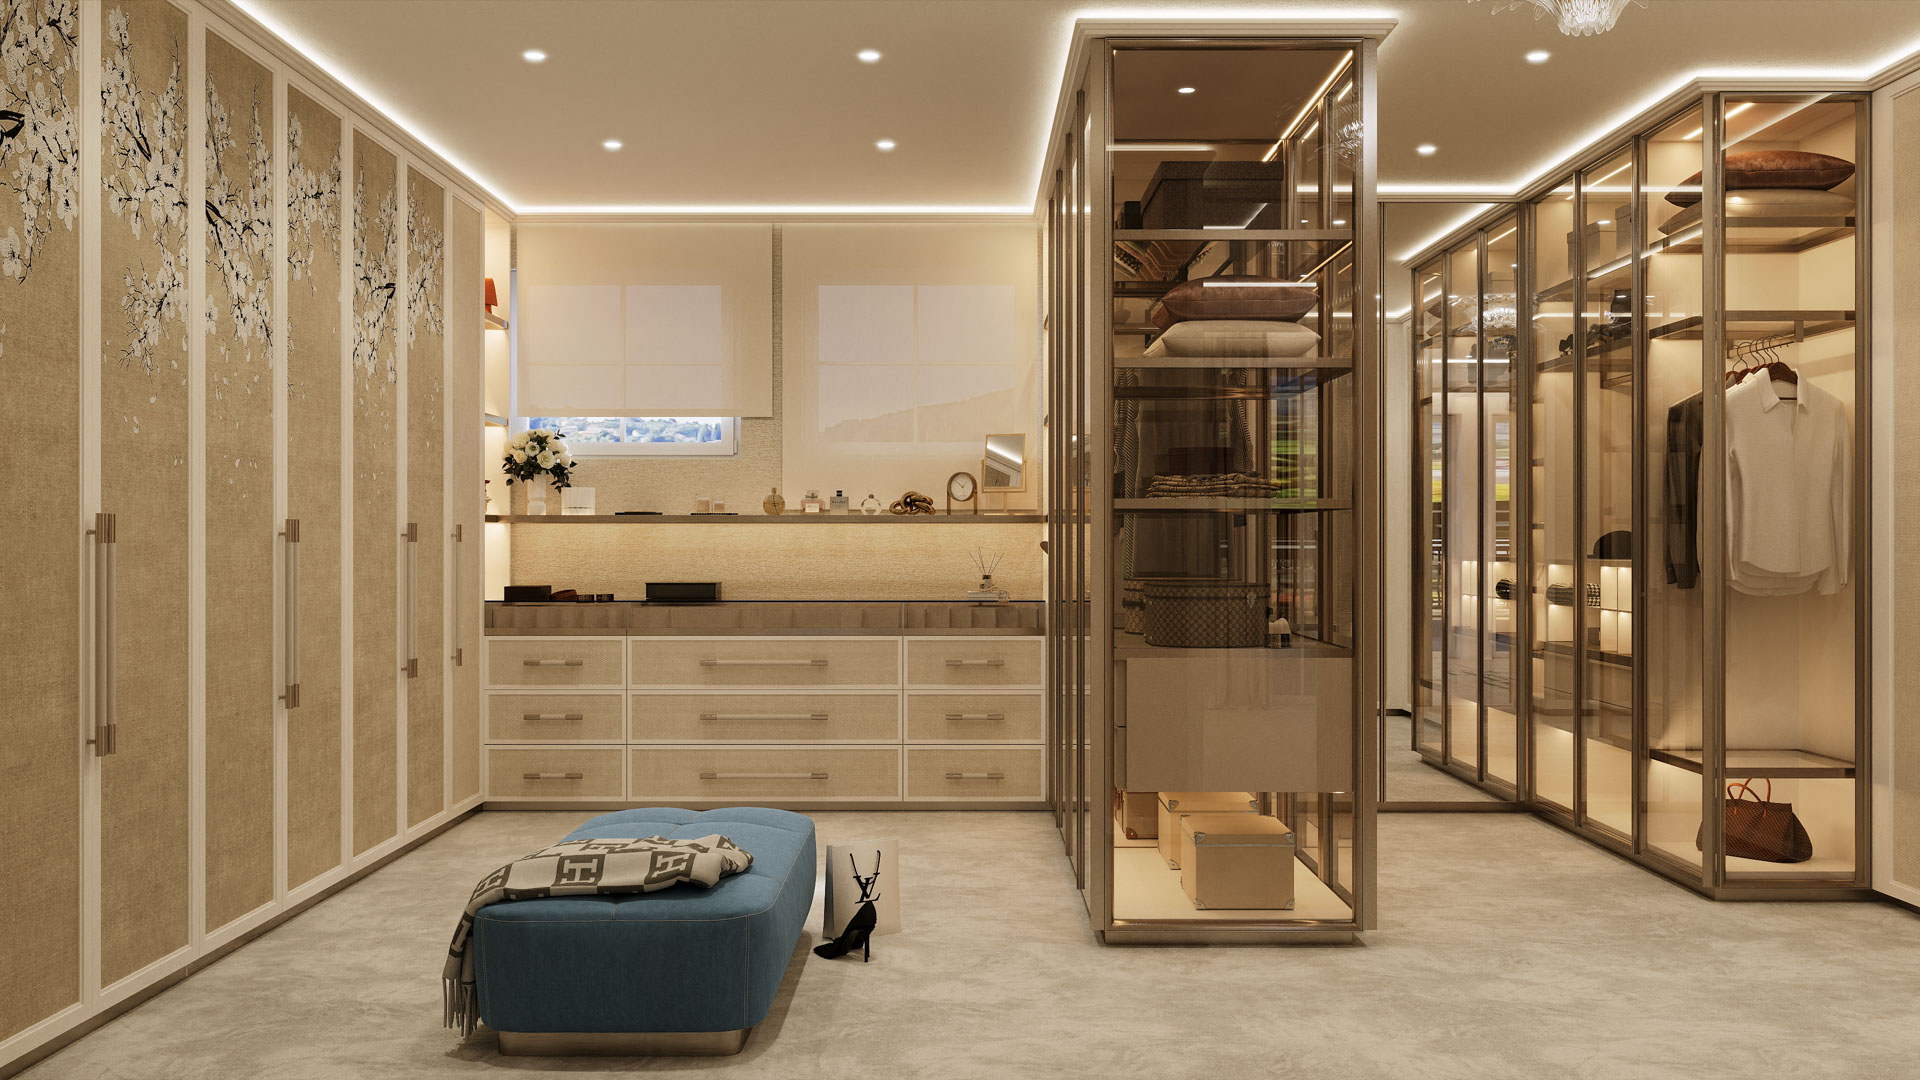 An elegant walk-in closet with mirrored wardrobes, glass display cases, a central ottoman, and soft lighting, creating a luxurious dressing area.